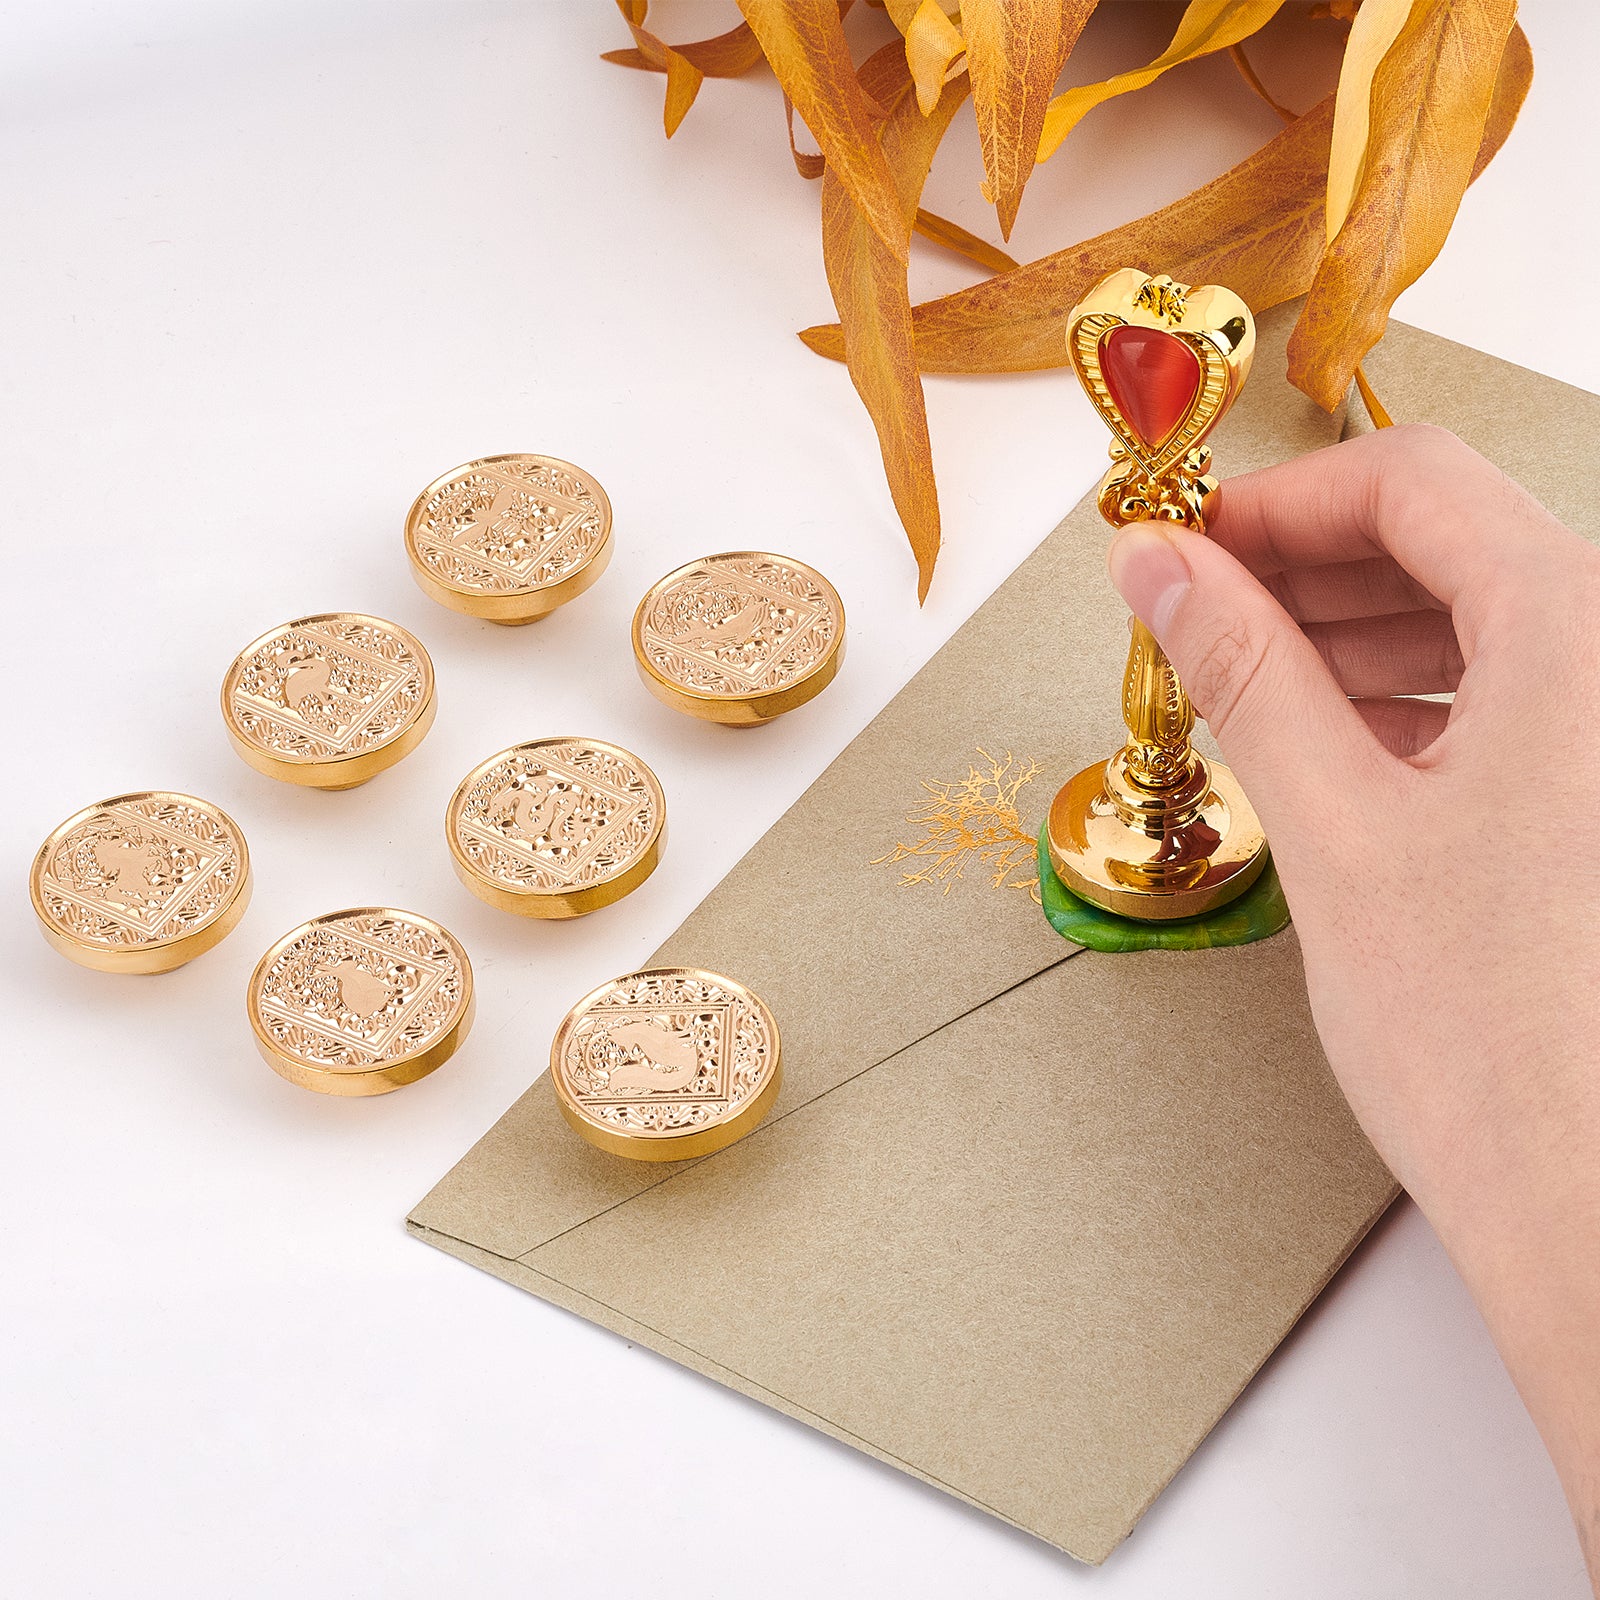 Wholesale CRASPIRE 8PCS Wax Seal Stamp Set Animal Theme 6PCS Sealing Wax  Stamp Heads with 2PCS Universal Wooden Handles for Invitations Cards  Birthday 